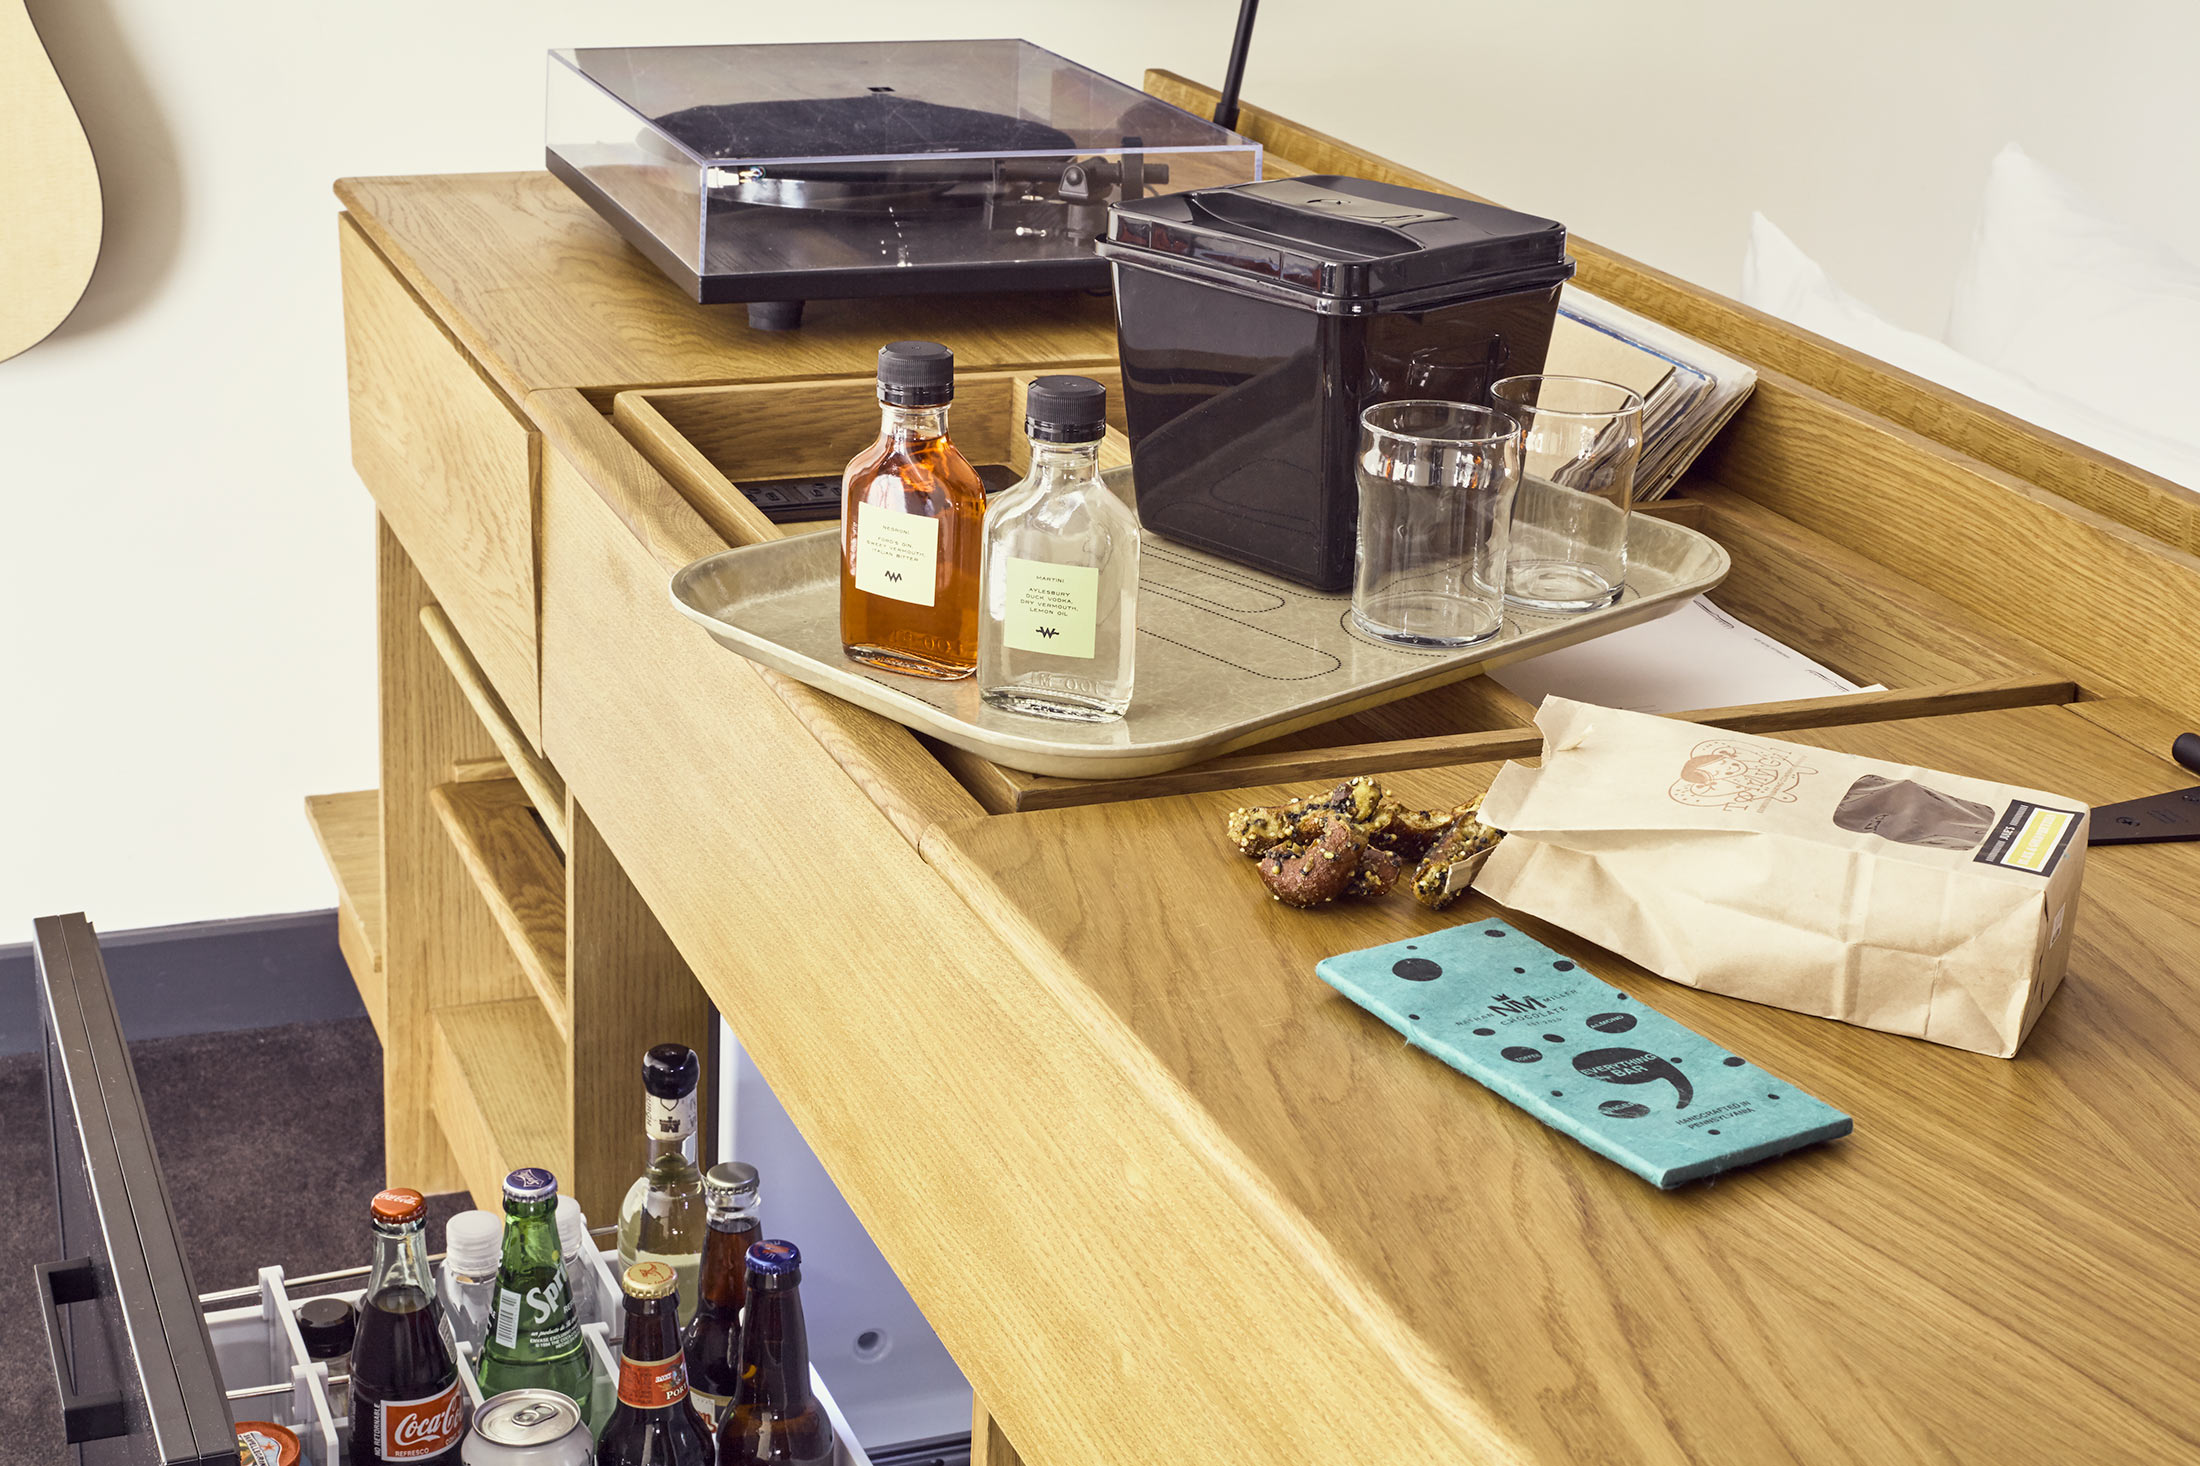 Hotel Minibars Try to Make a Comeback With Better Design and Local Products